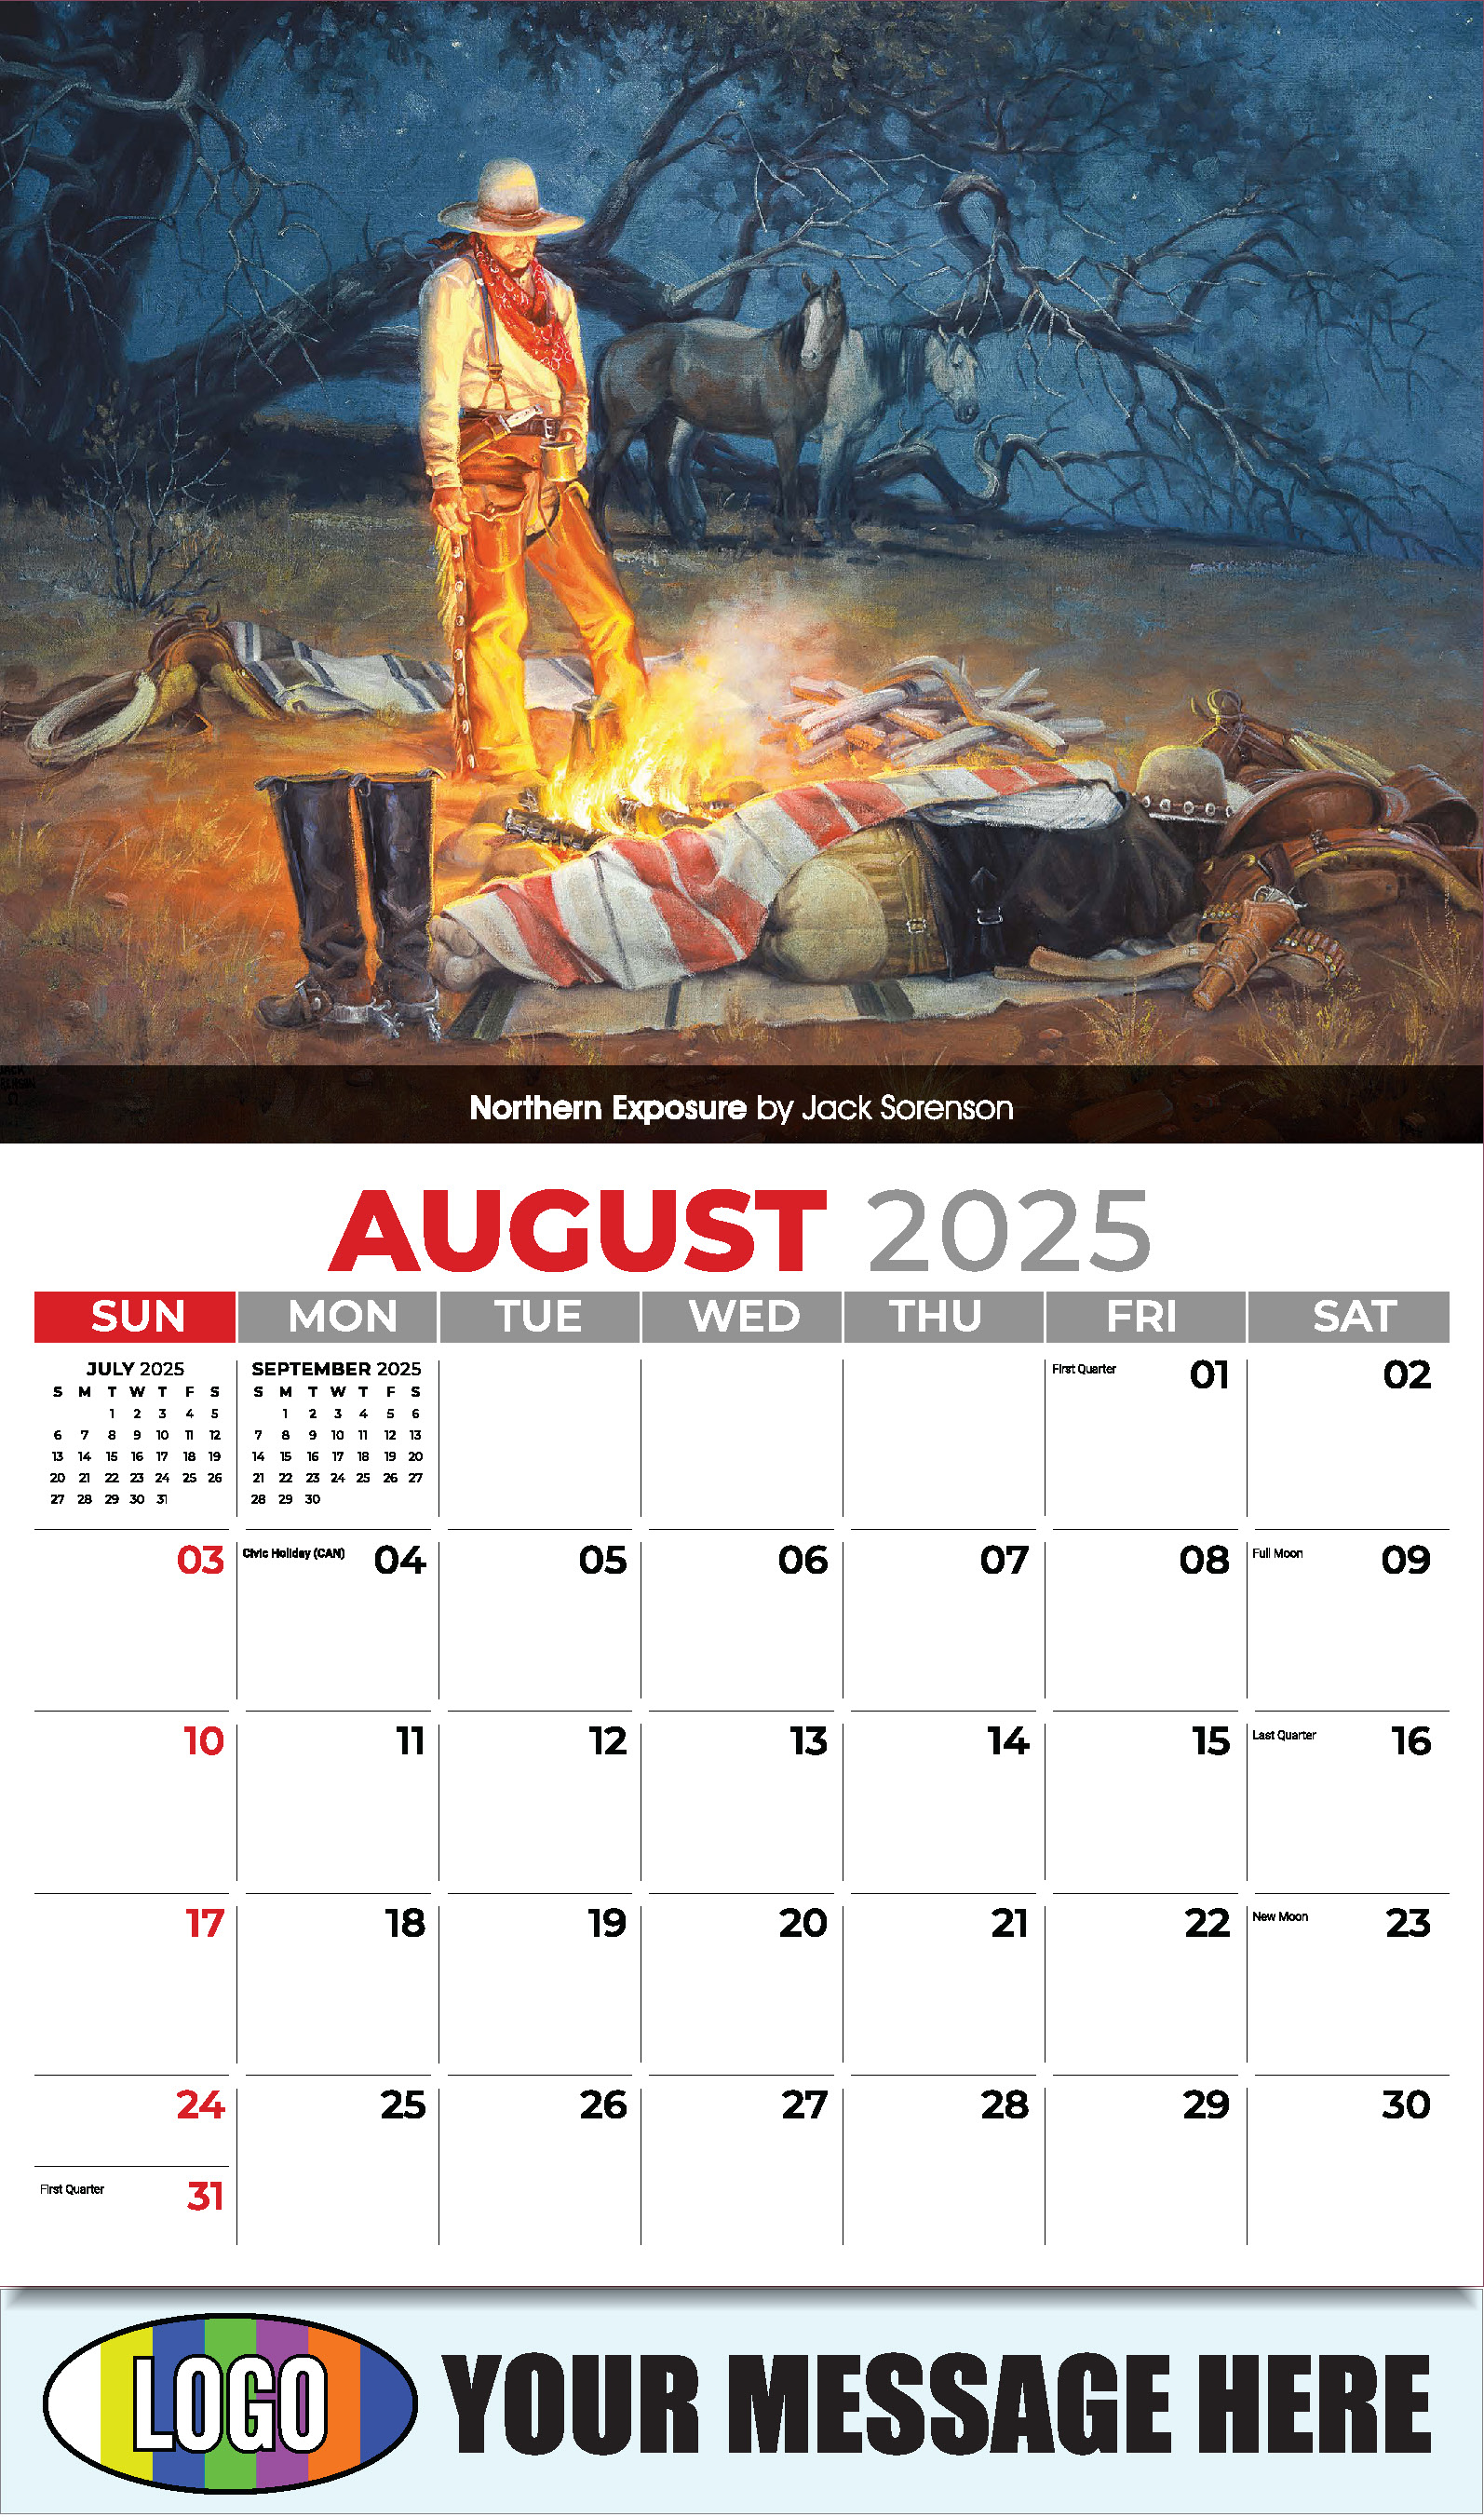 Spirit of the Old West 2025 Old West Art Business Promo Wall Calendar - August